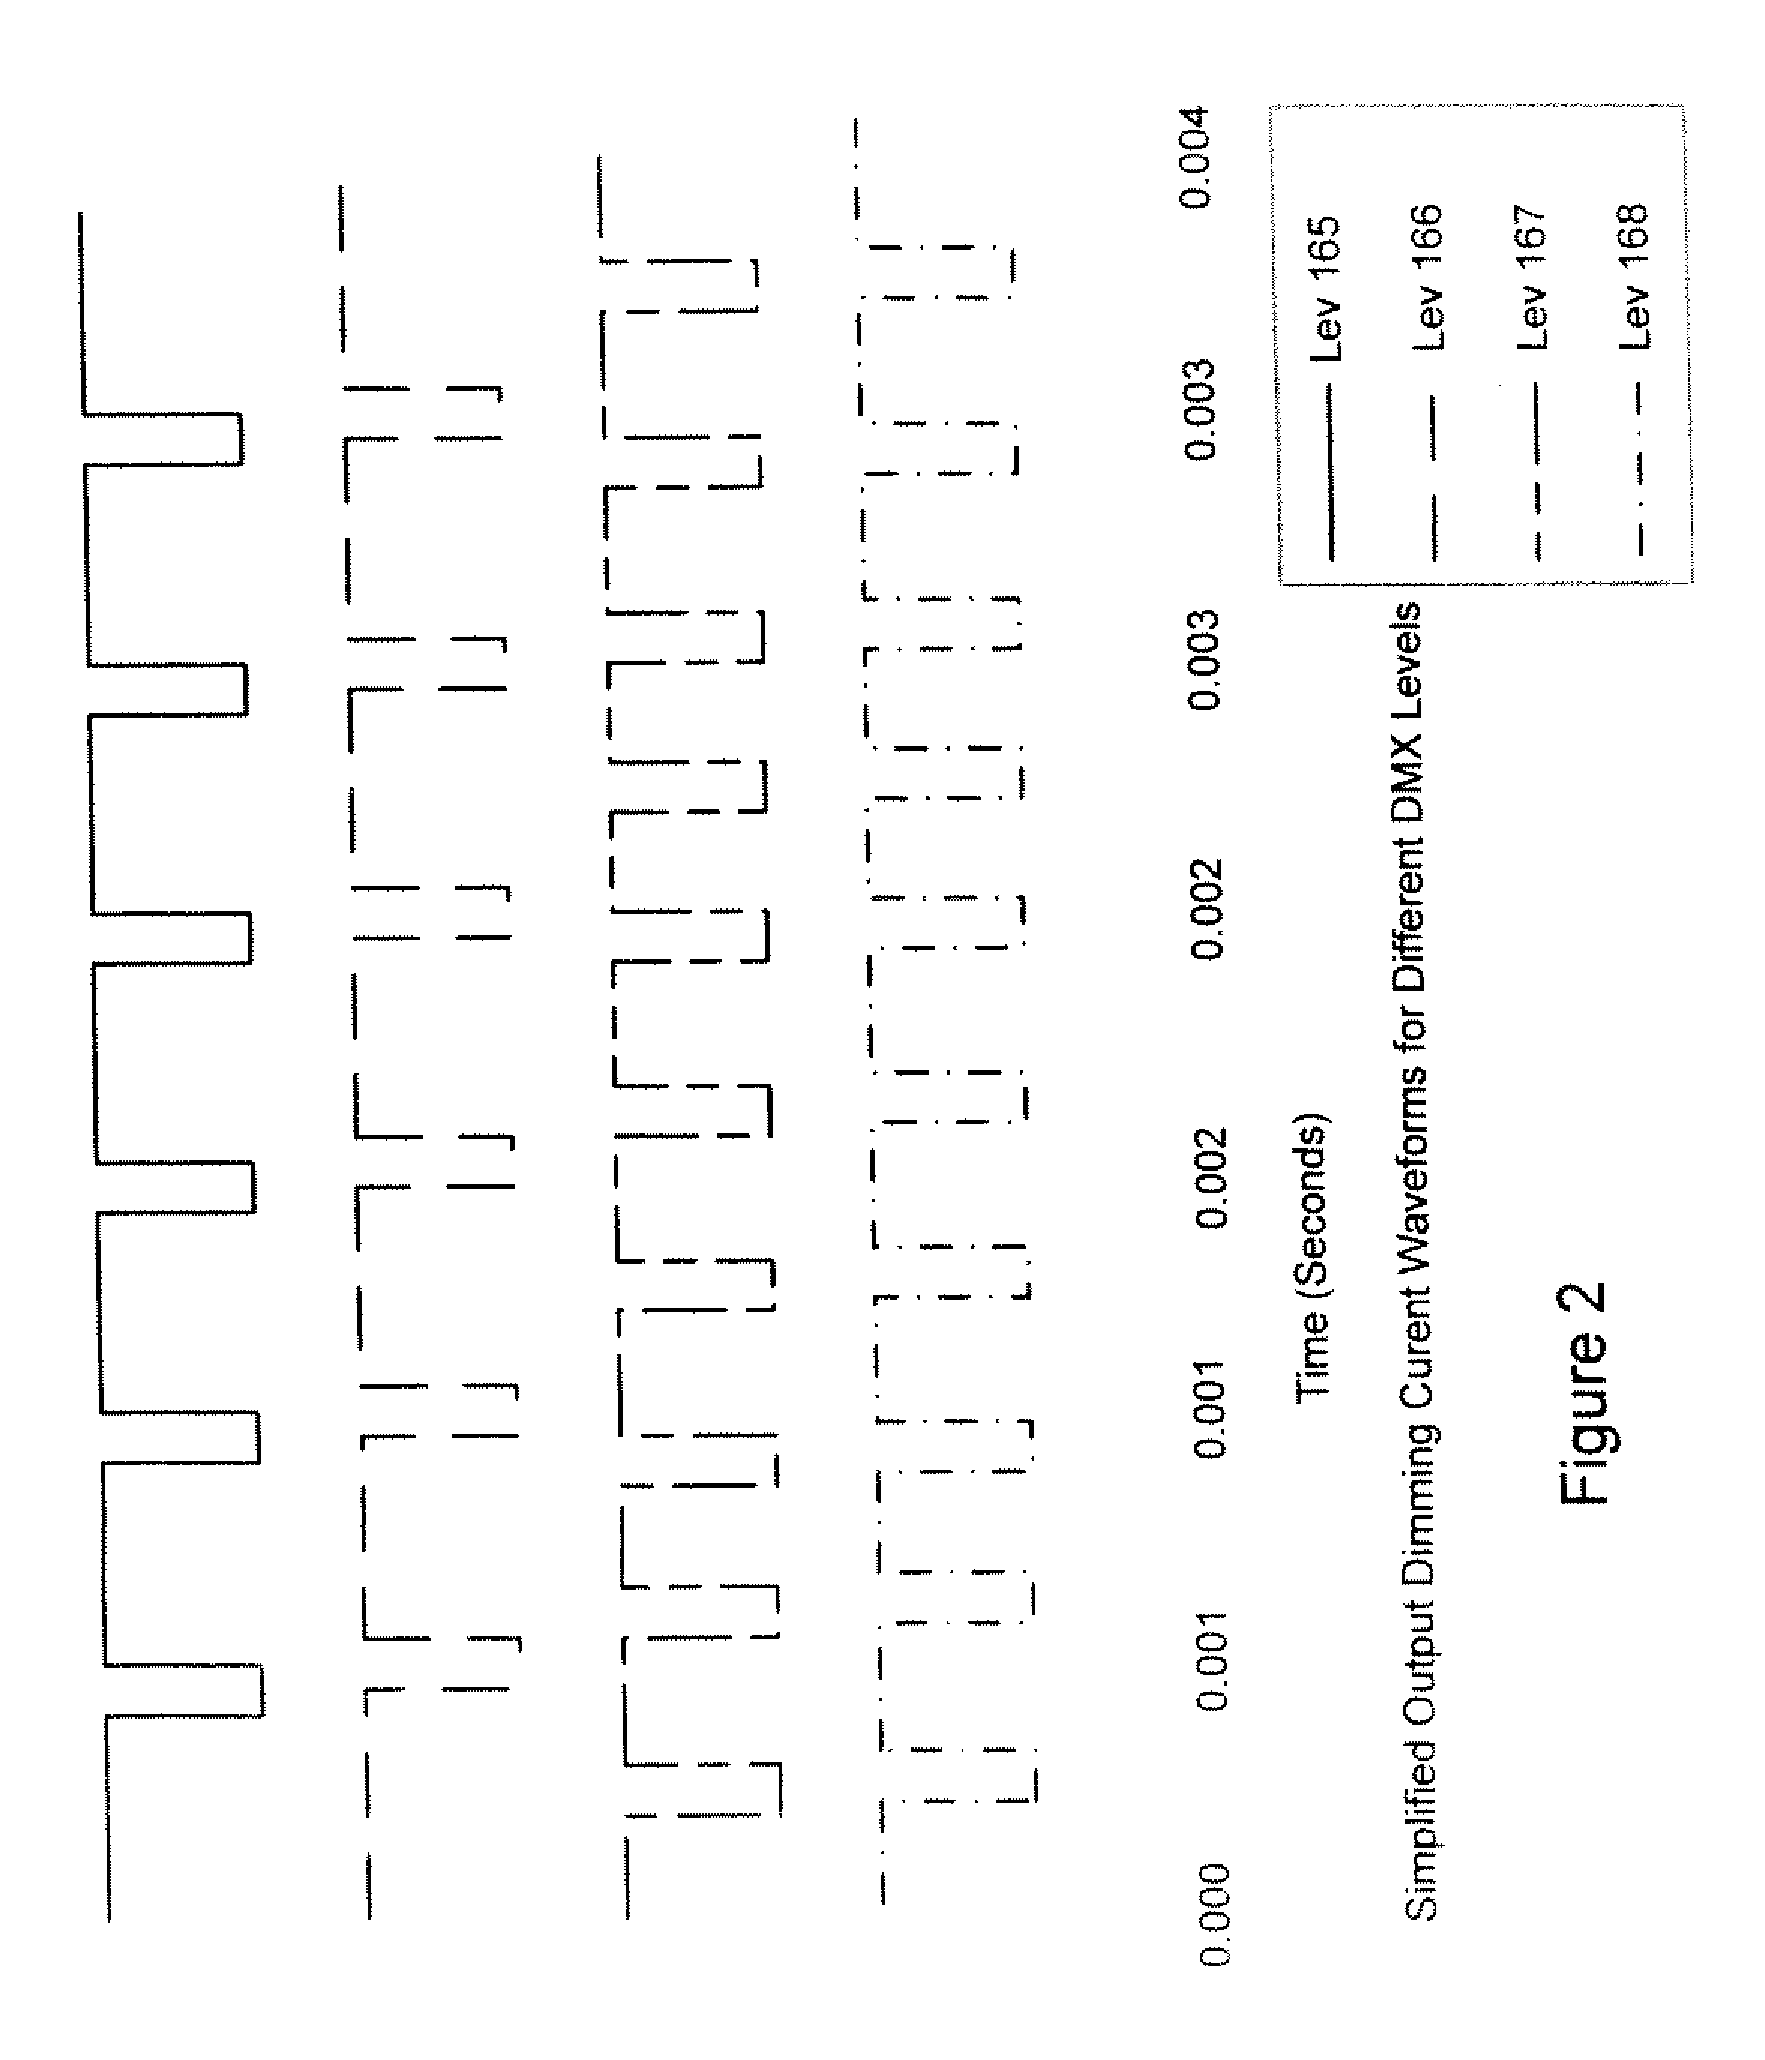 Modulation method and apparatus for dimming and/or colour mixing utilizing leds